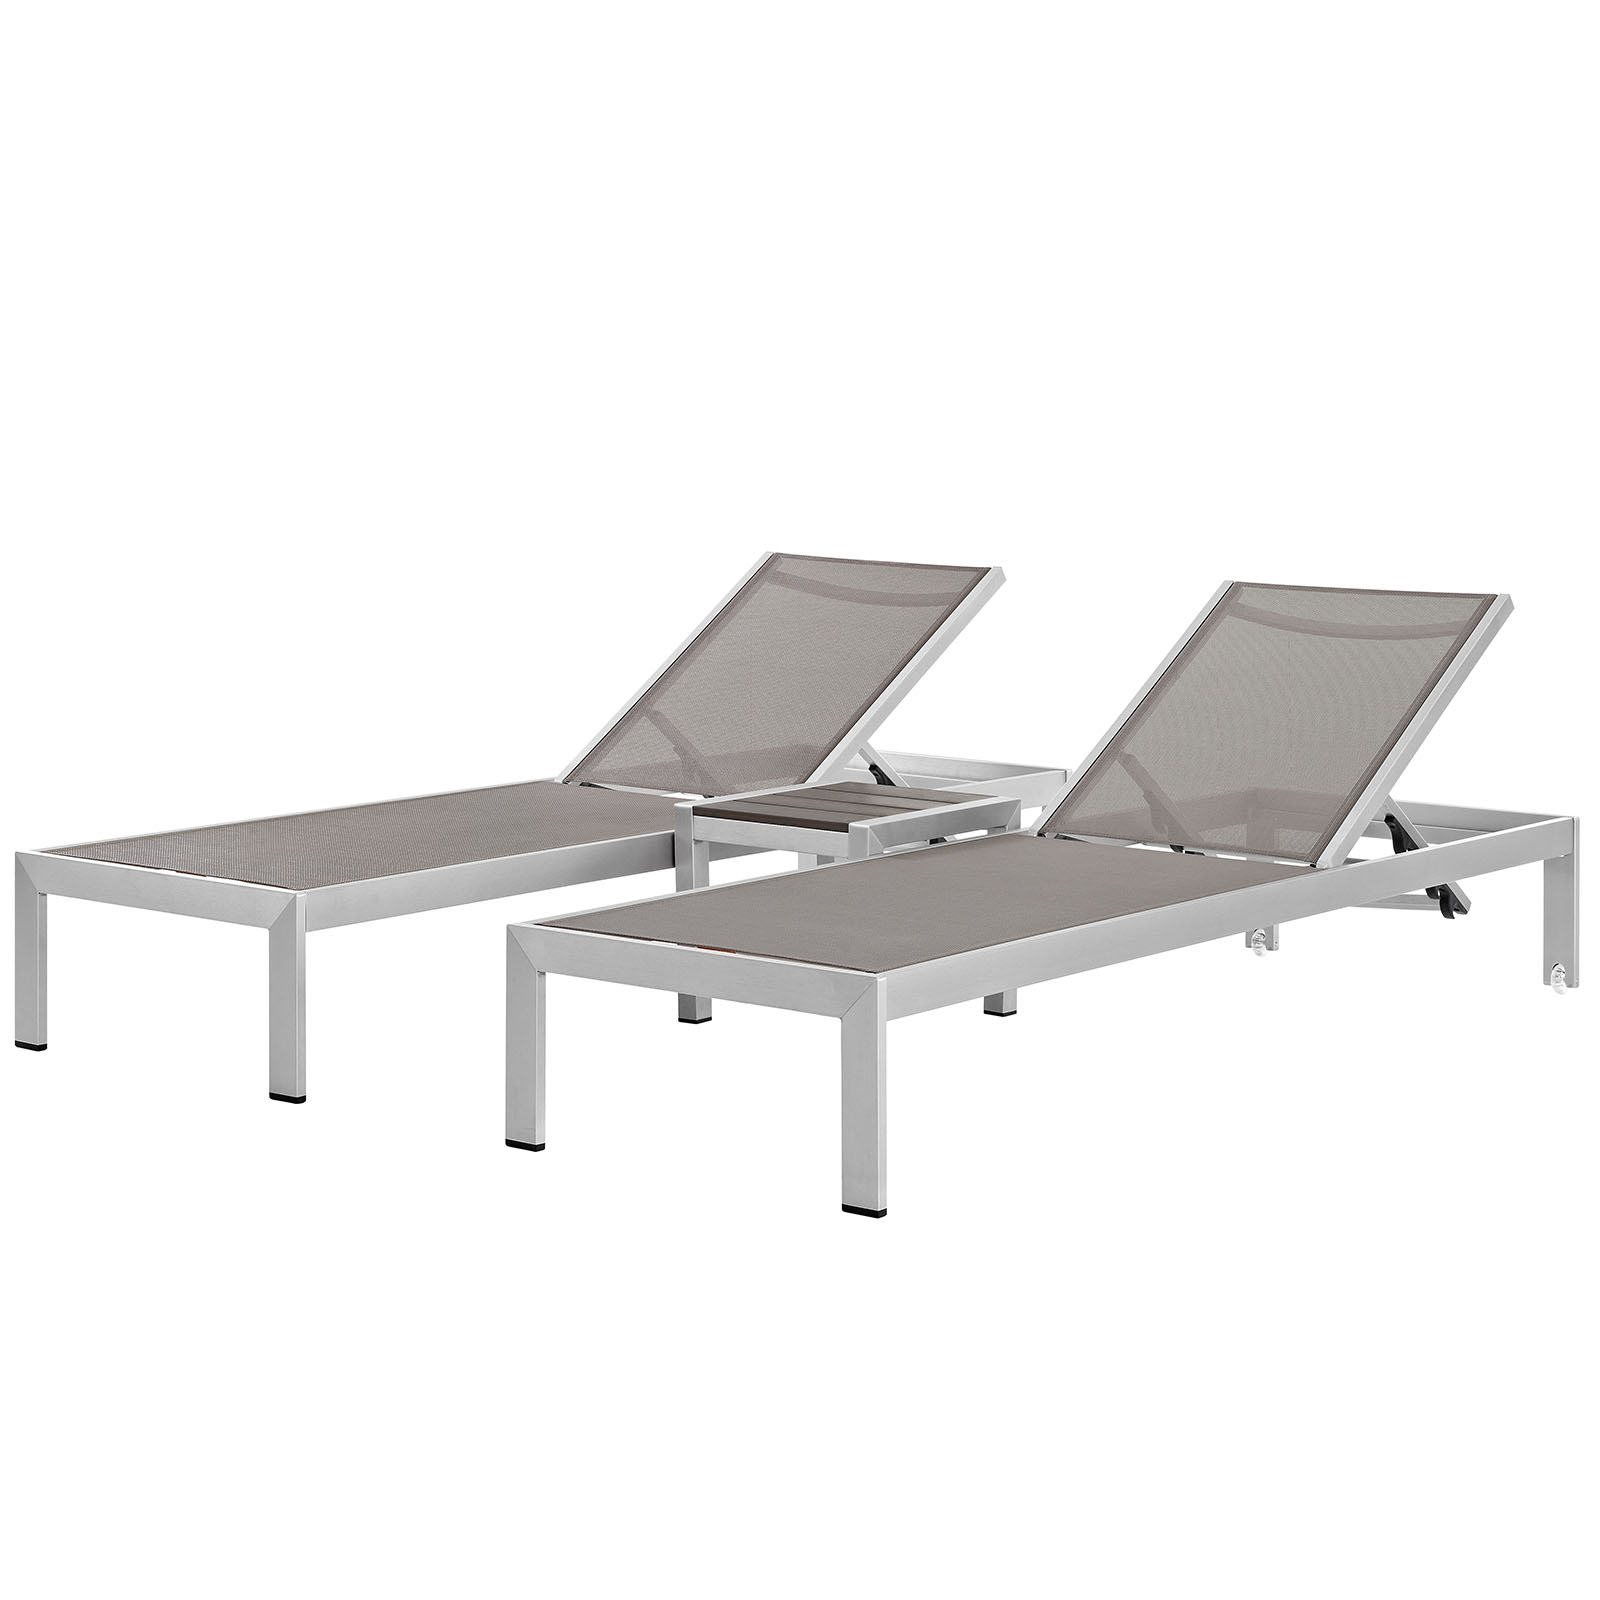 Modern Contemporary Urban Outdoor Patio Balcony Garden Furniture Lounge Chair Chaise and Side Table Set, Aluminum Metal Steel, Grey Gray - image 1 of 7